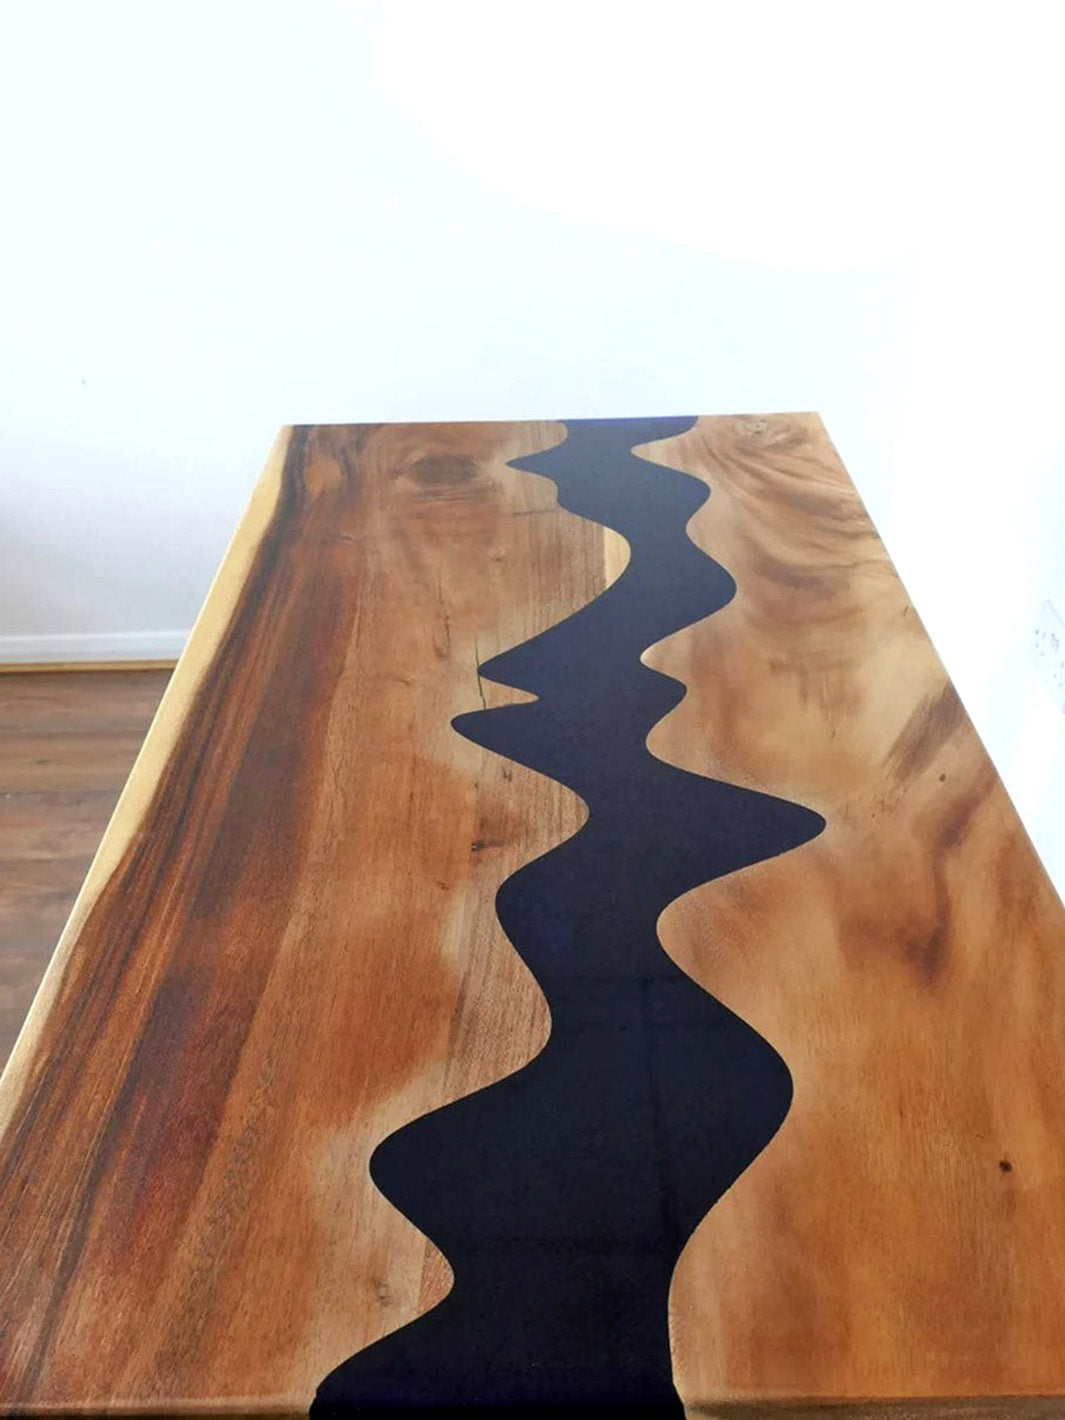 Handcrafted River Beach Epoxy Resin Wooden Coffee Table | 4ft x 2ft Made 4 Decor Tables MDR0007-3